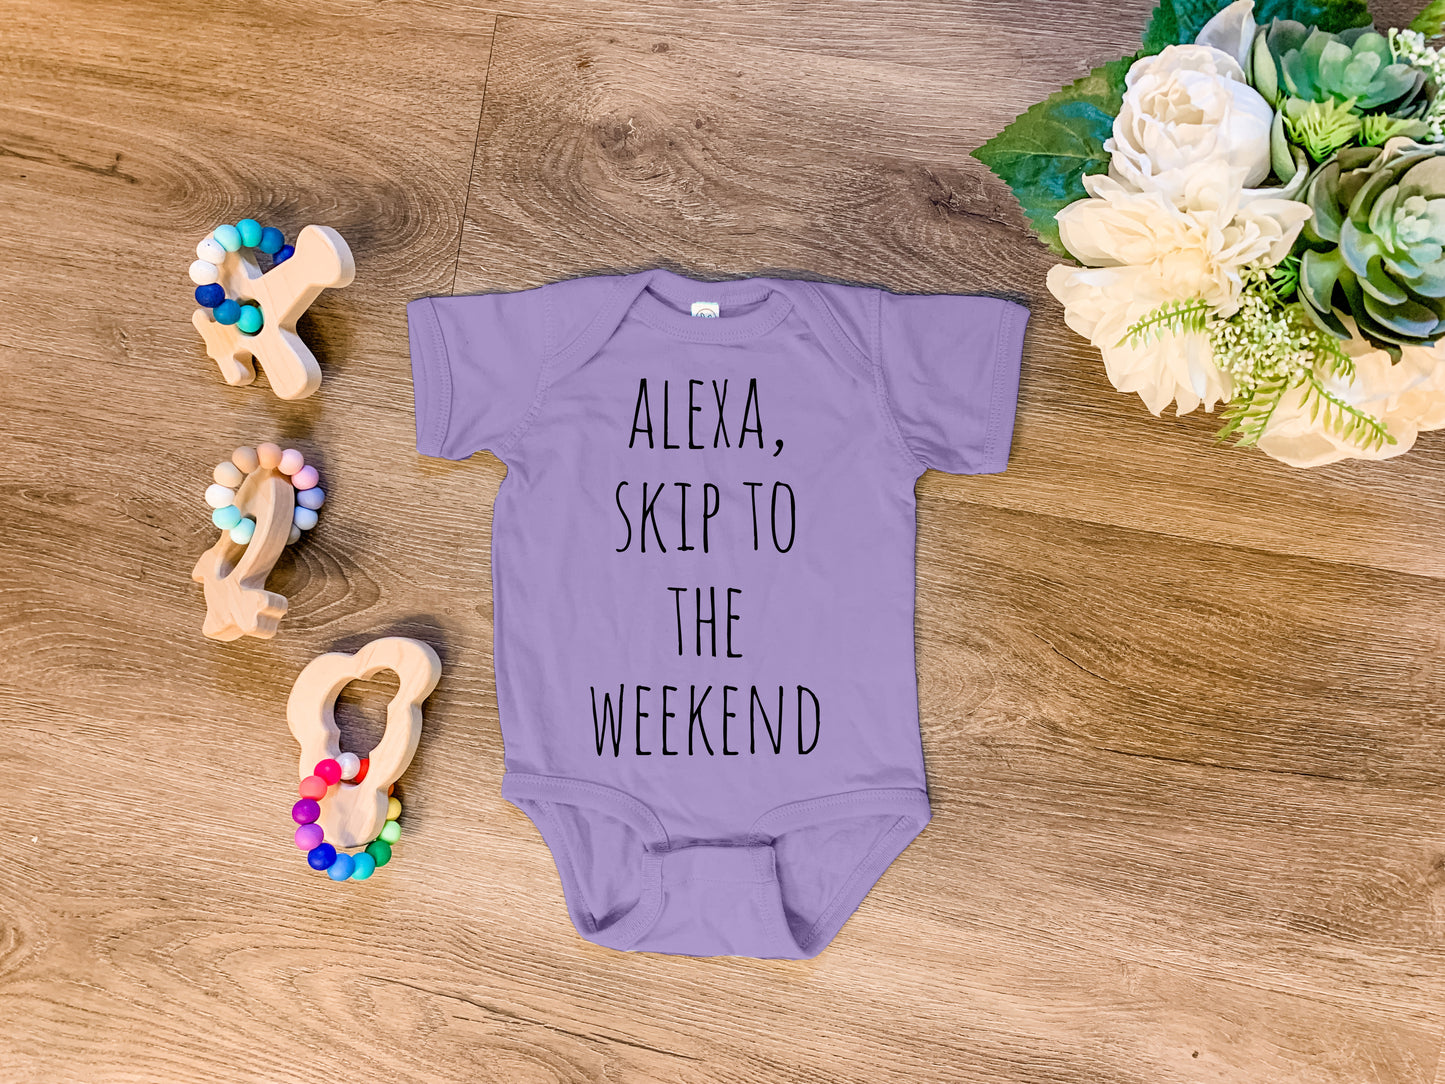 Alexa, Skip to the Weekend - Onesie - Heather Gray, Chill, or Lavender